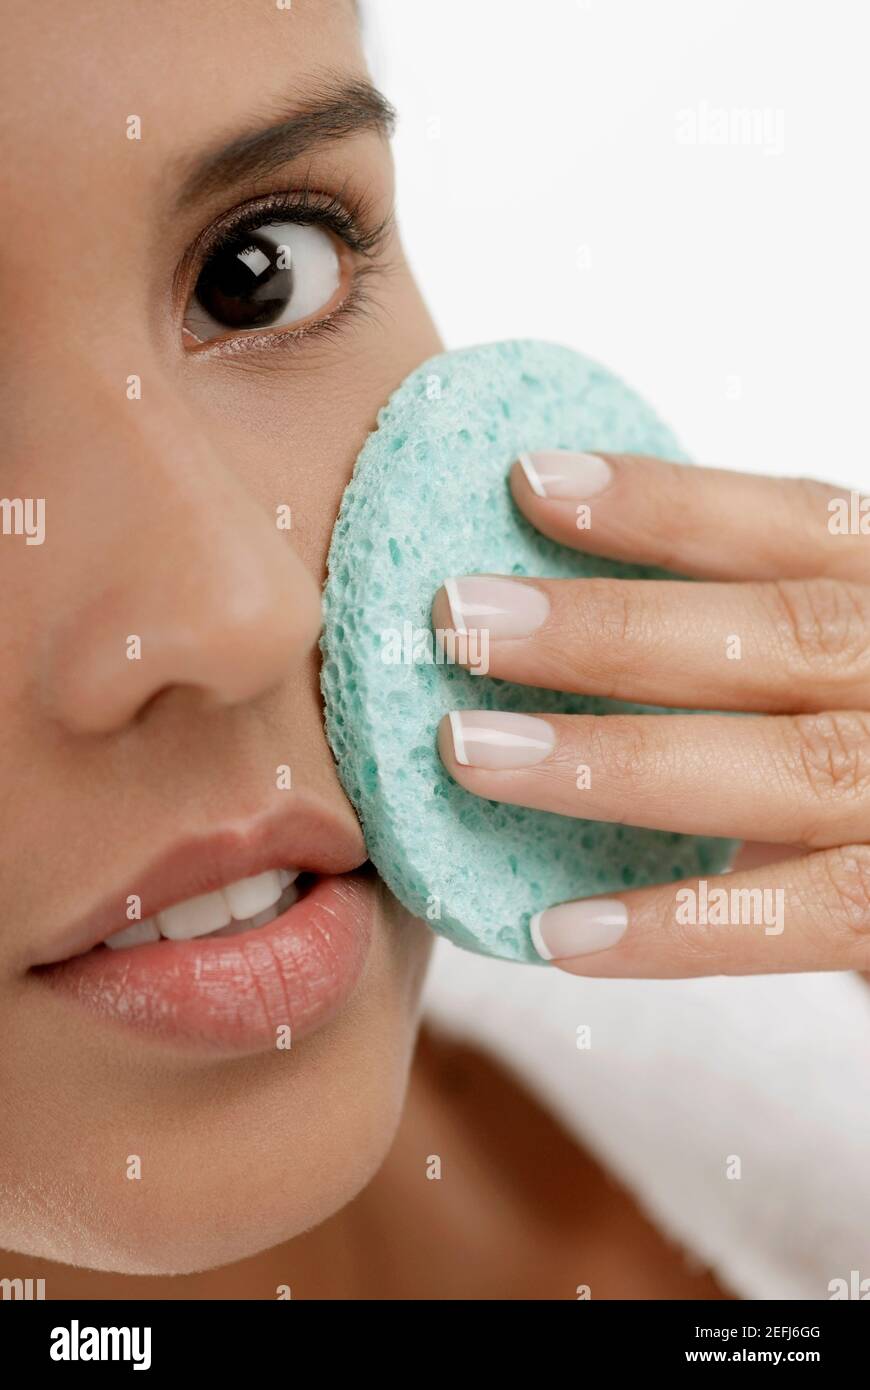 Portrait of a young woman scrubbing her face with a sponge Stock Photo